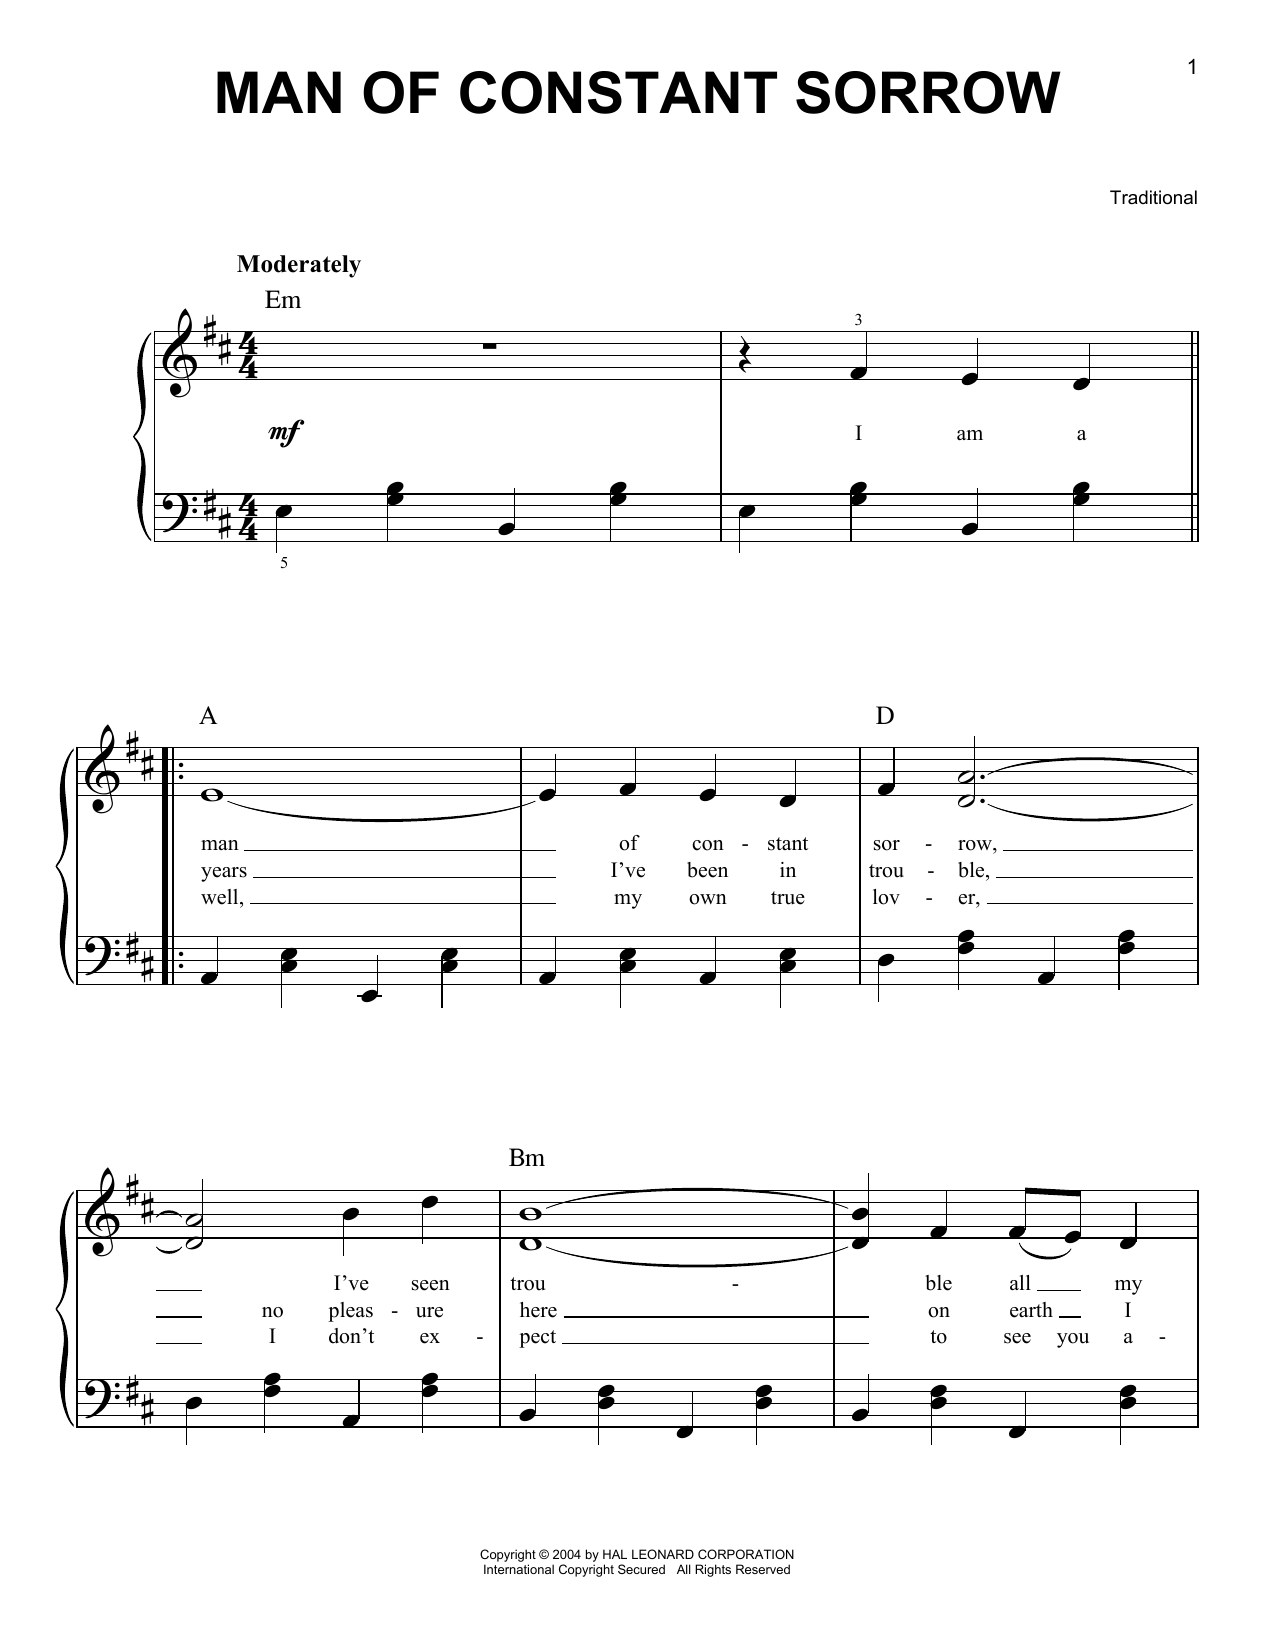 Traditional Man Of Constant Sorrow sheet music preview music notes and score for E-Z Play Today including 1 page(s)